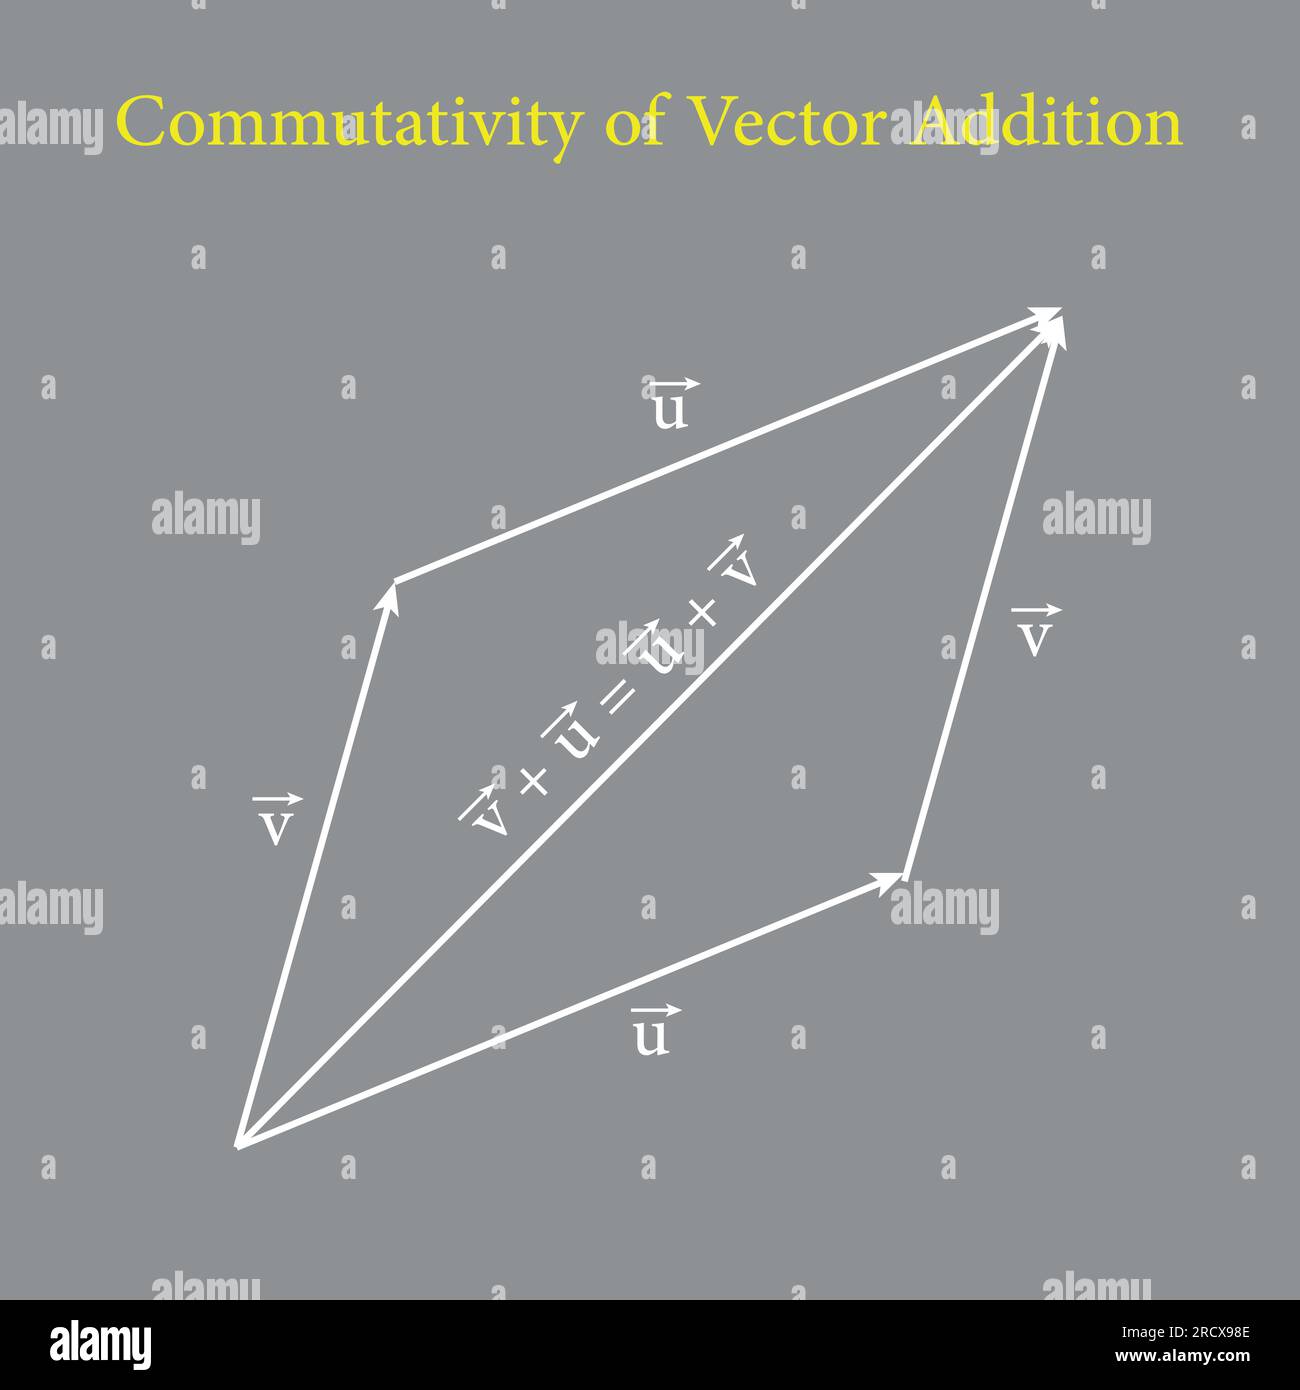 Commutativity of vector addition graphical method. Commutative law. Triangle law of vector addition. Definition of a vector space. Stock Vector